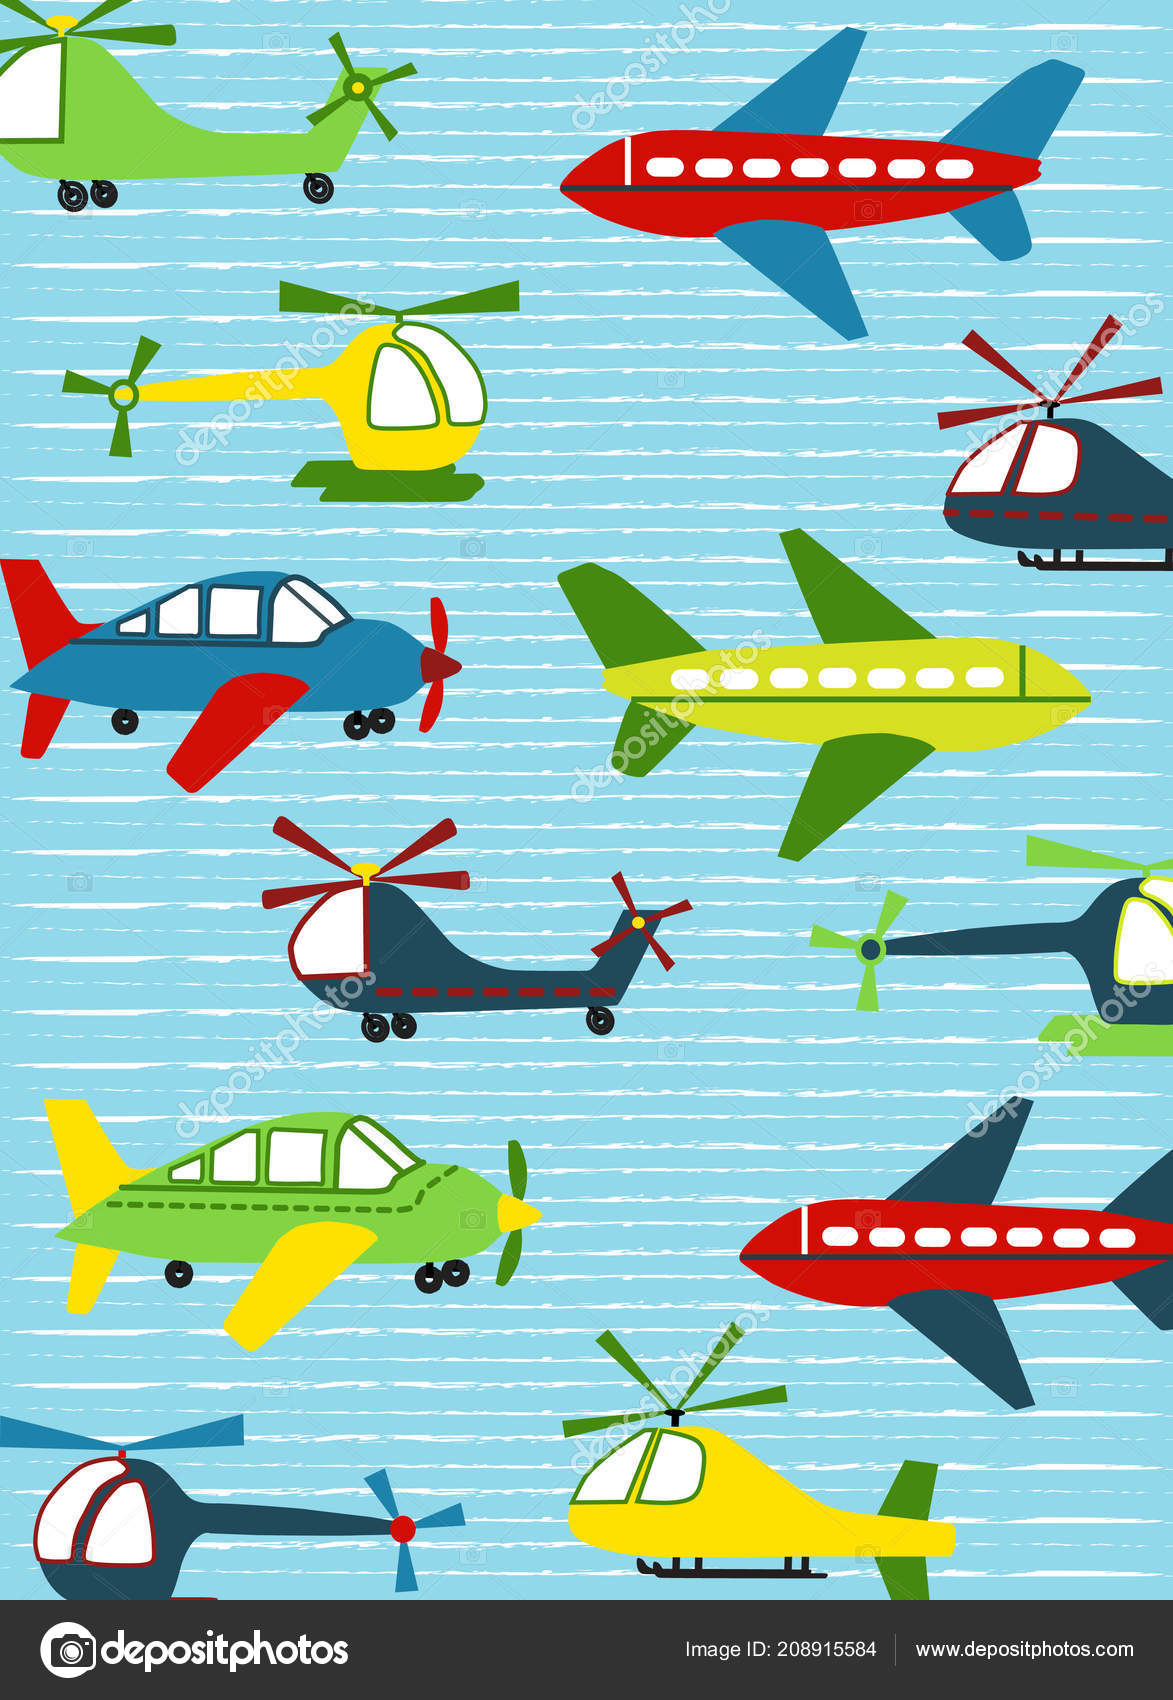 Airplane Helicopter Images Use Placement Prints Children Apparel Nursery Wall Vector Image By C Thesimplesurface Vector Stock